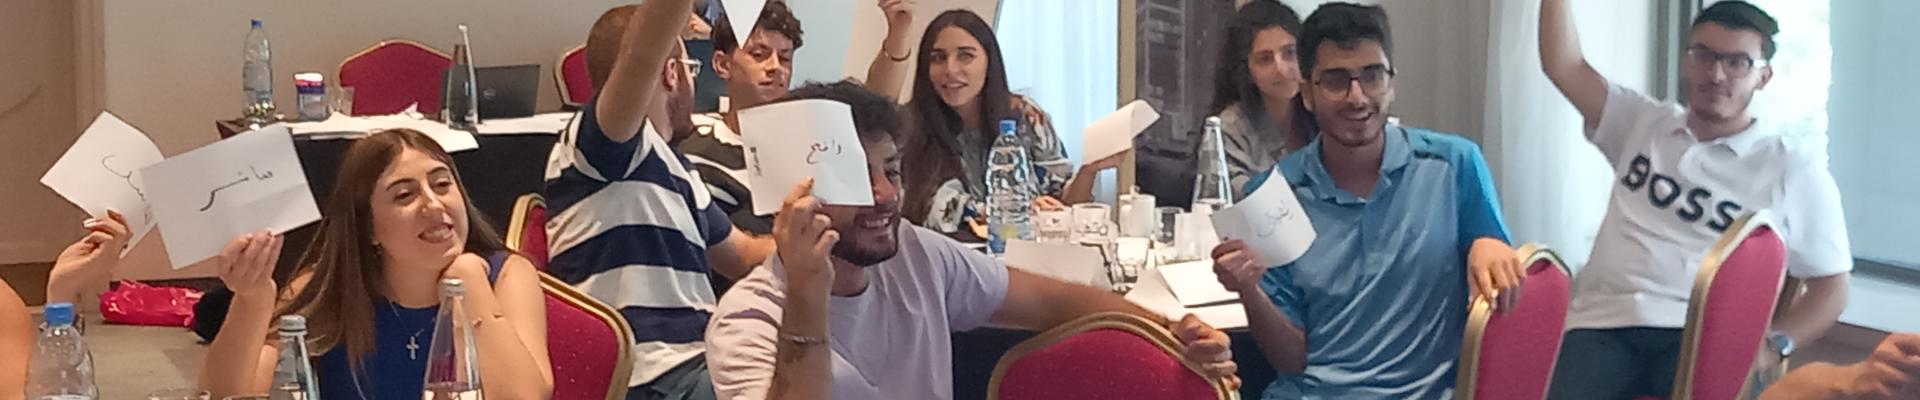 Youth in Lebanon lifting papers in a meeting